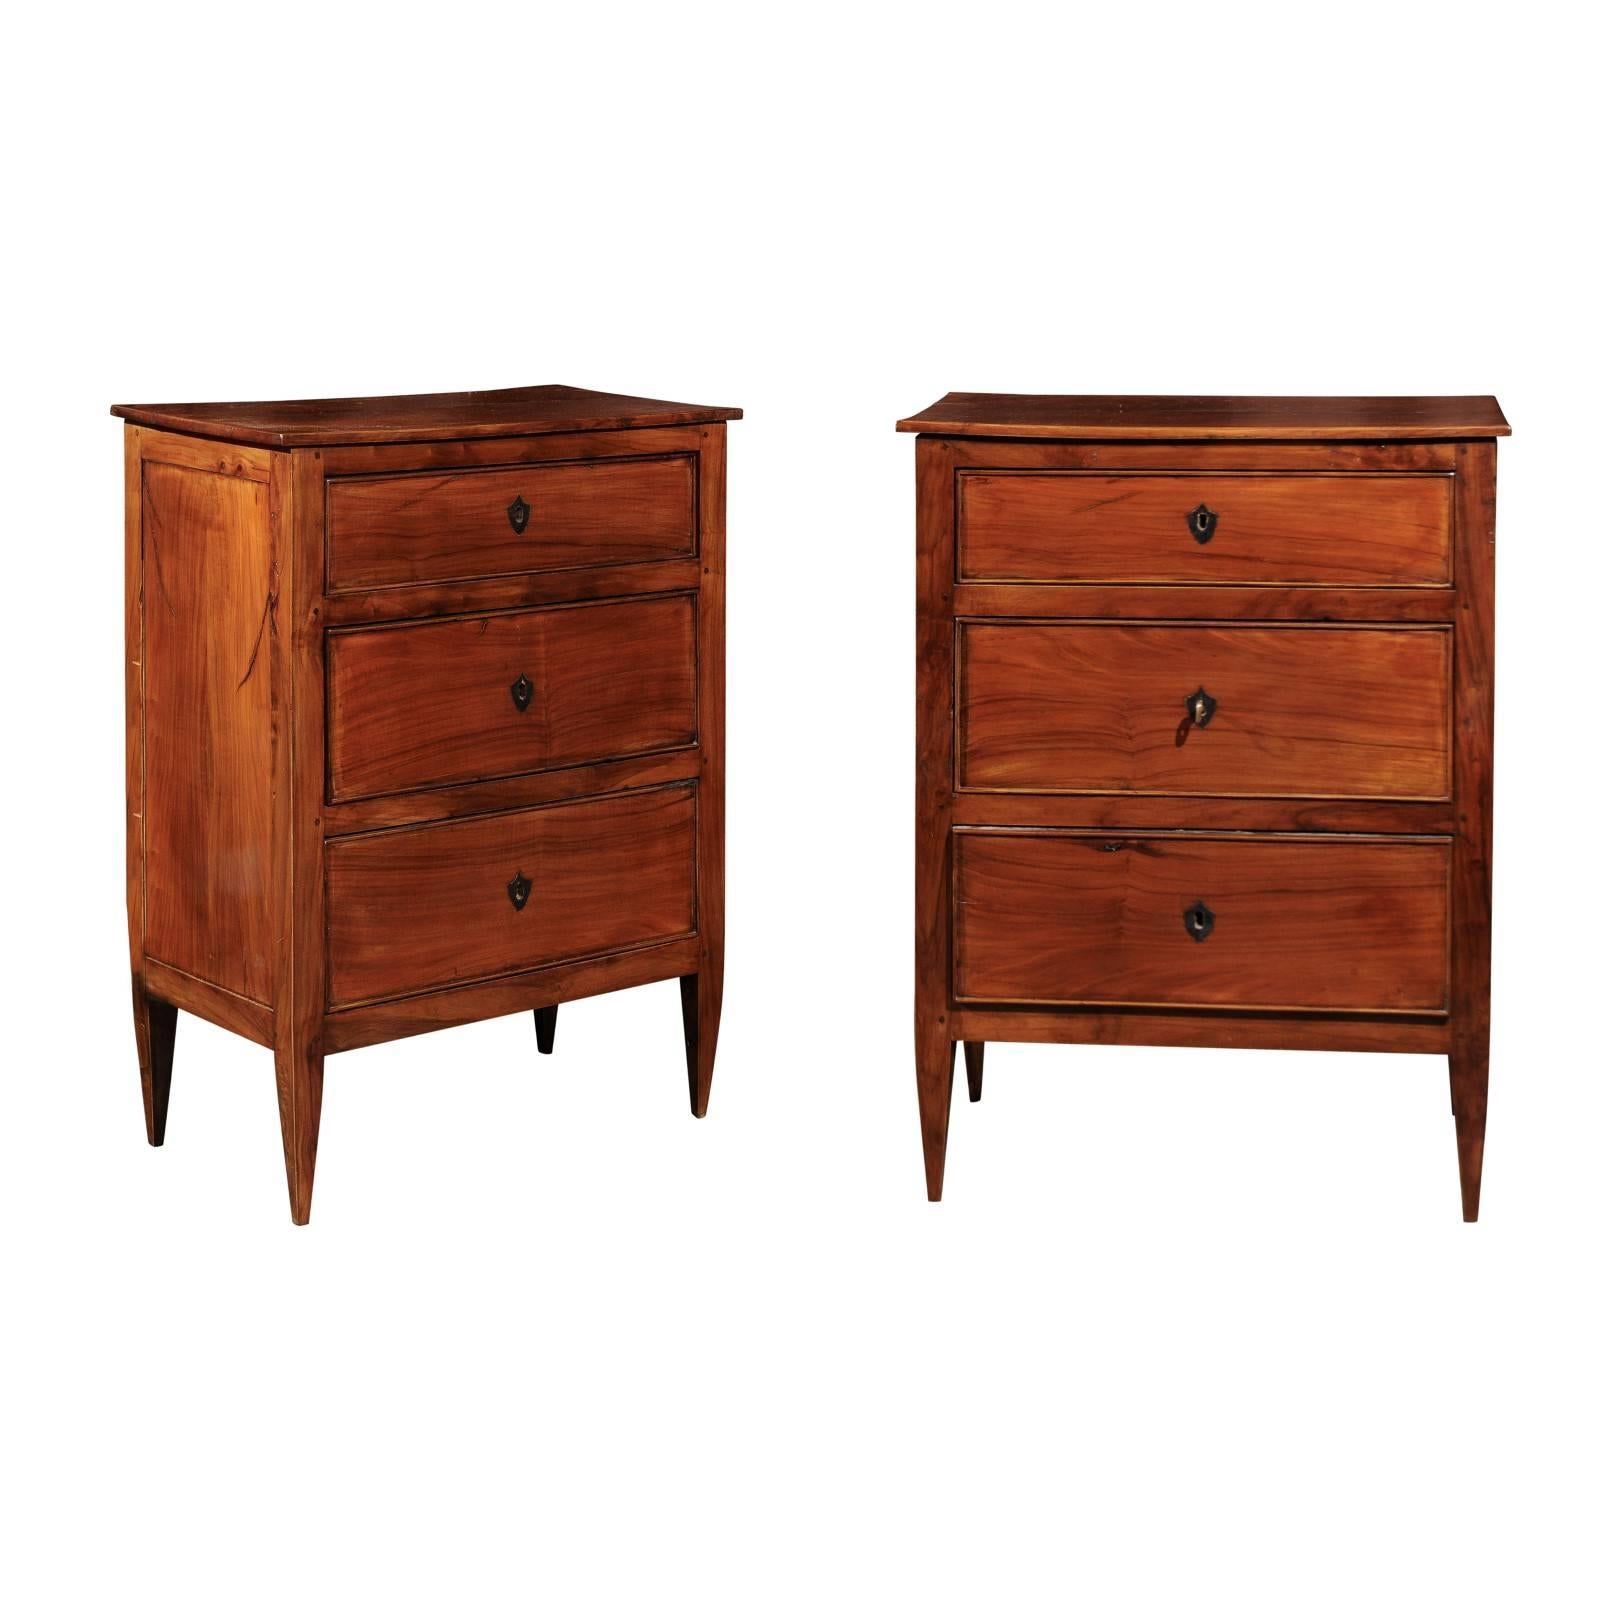 Pair of French Directoire Style Small Size Cherry Commodes from the 1920s